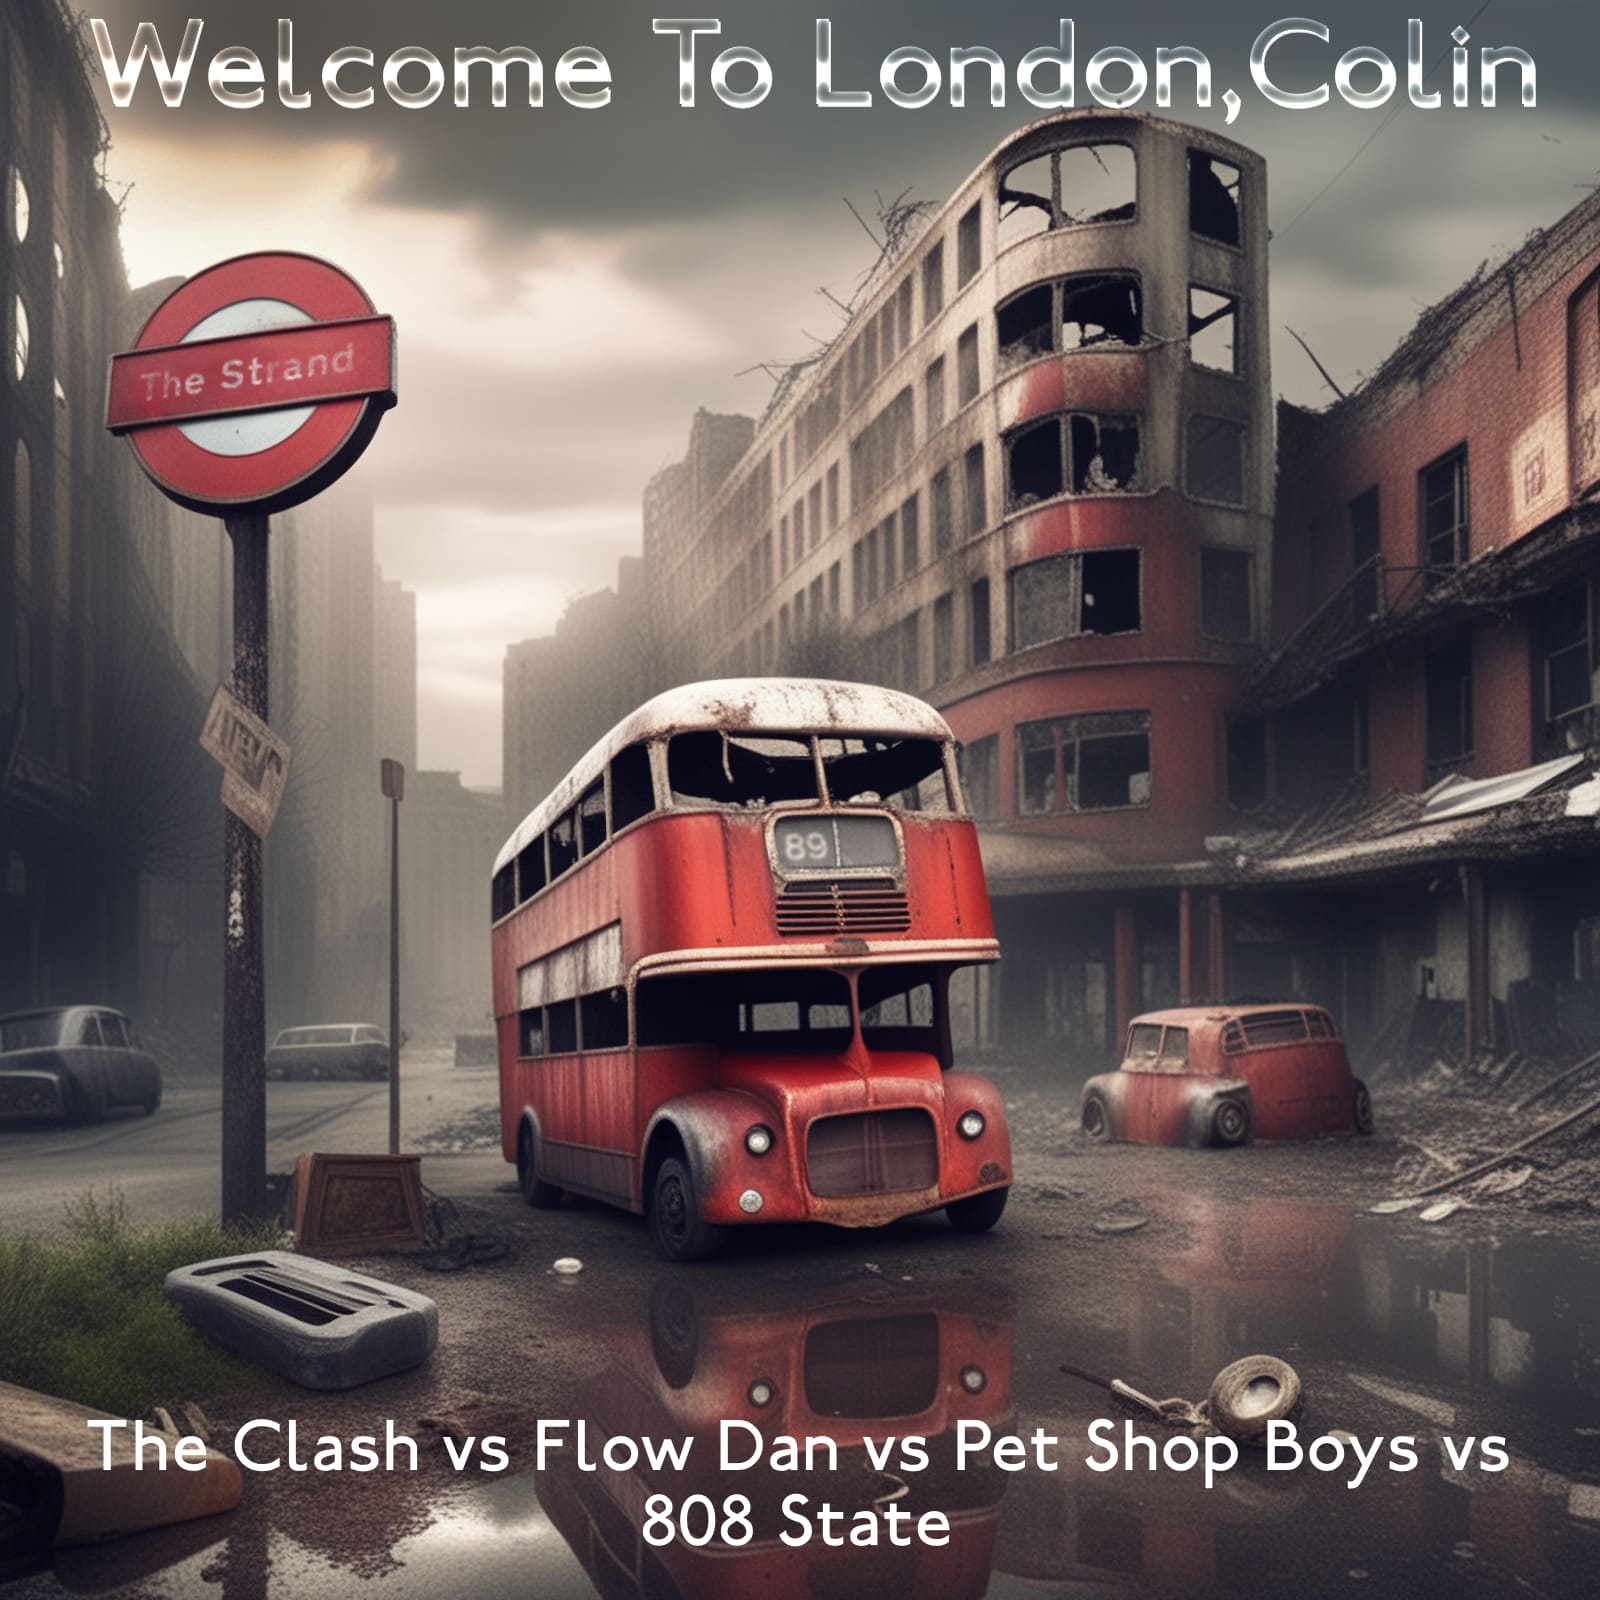 Instamatic - Welcome To London, Colin (The Clash vs Flowdan vs Pet Shop Boys vs 808 State) mashup cover